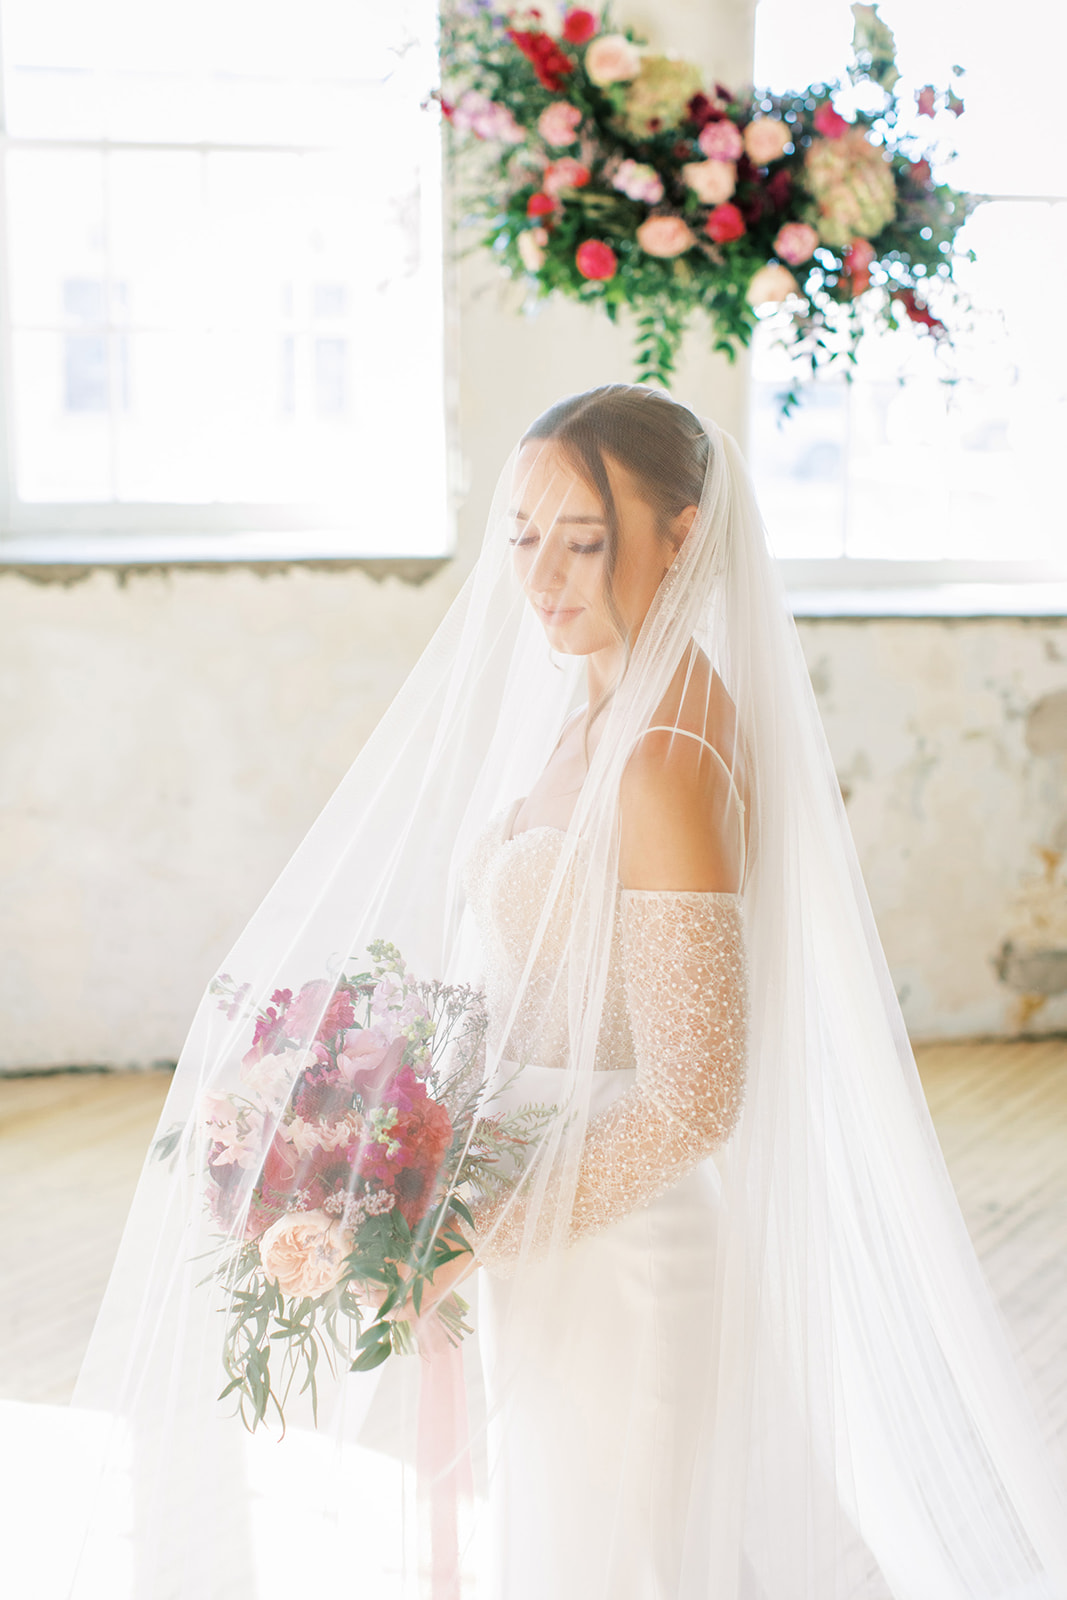 Stunning bridal portrait inspiration, bride wearing cathedral blusher veil during vintage inspired wedding ceremony, featuring hanging florals created by Rose & Vine. 